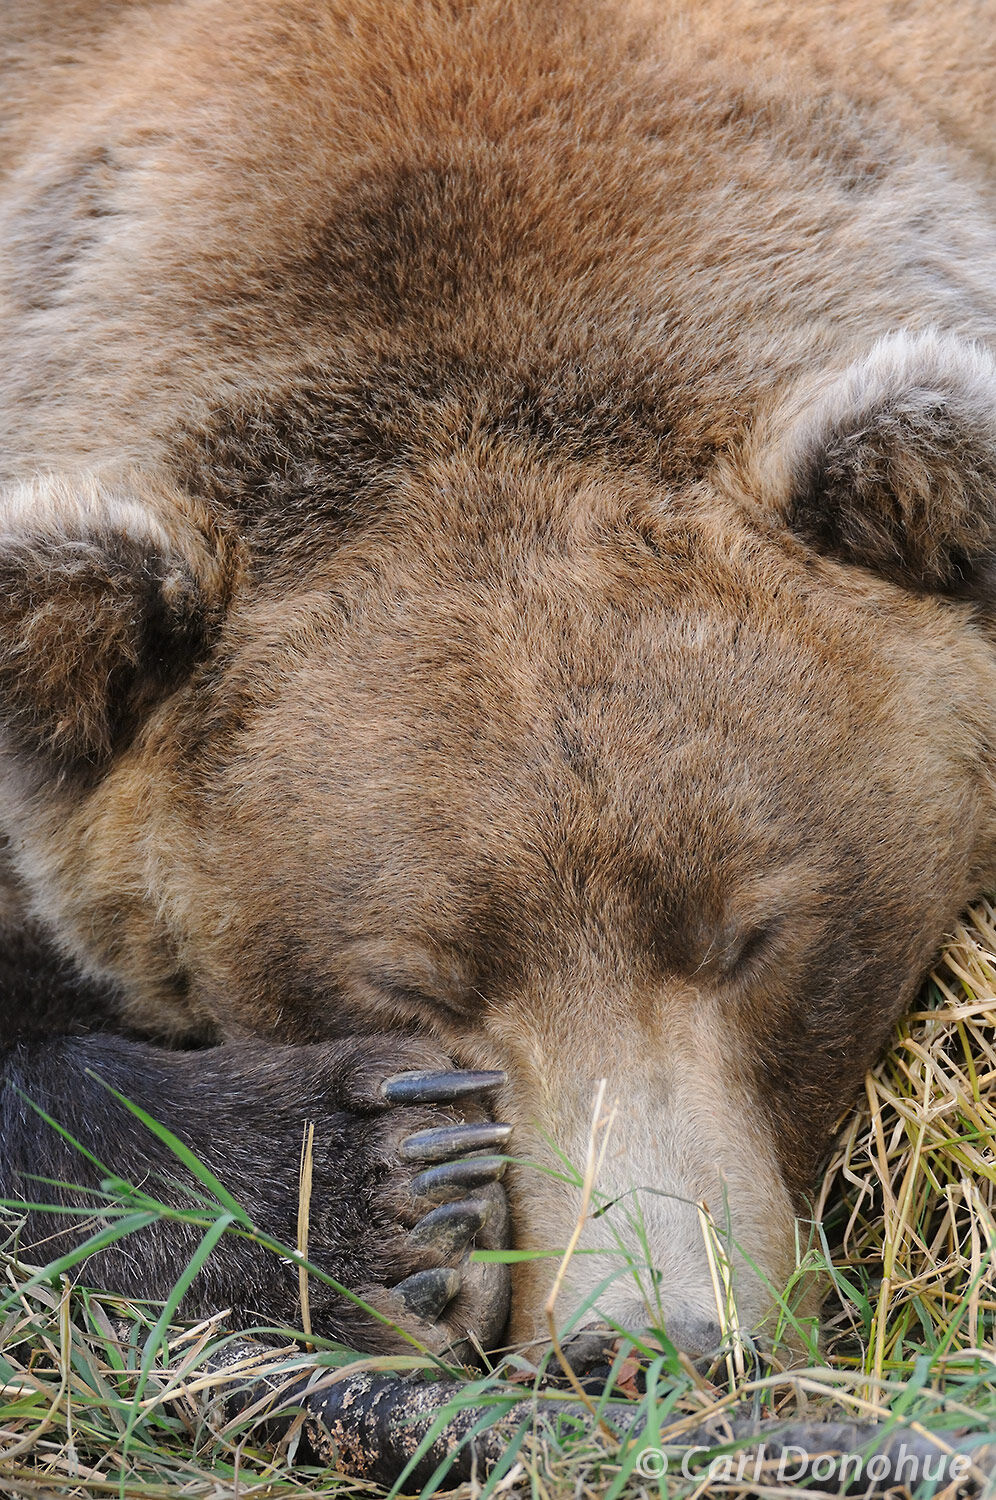 A large adult male grizzly bear (Ursus arctos) sleeping in grass, closeup headshot, showing face and claws, paw over his nose...